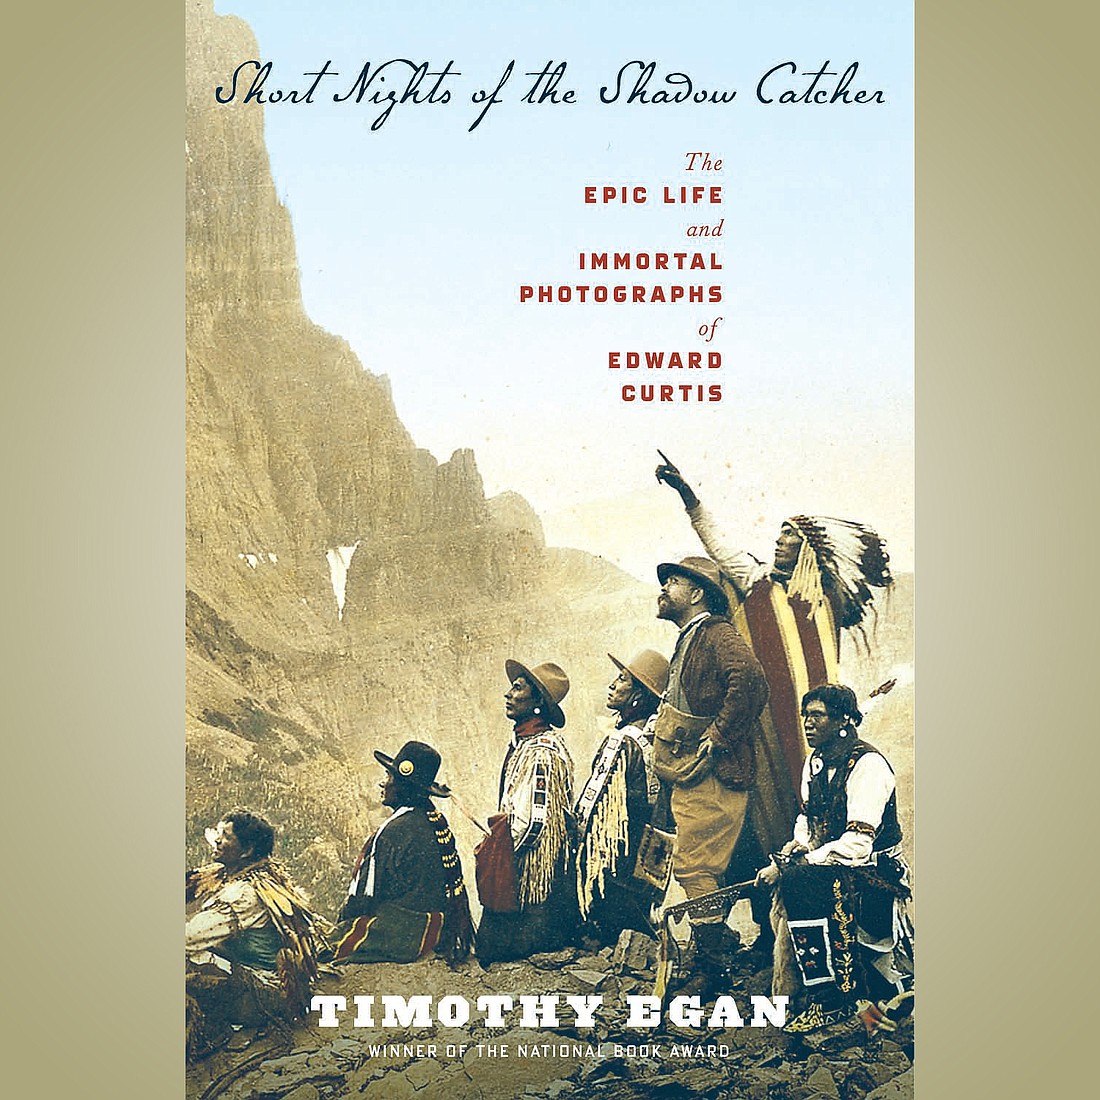 Author and Pulitzer Prize winner Timothy Egan: 'My faith is